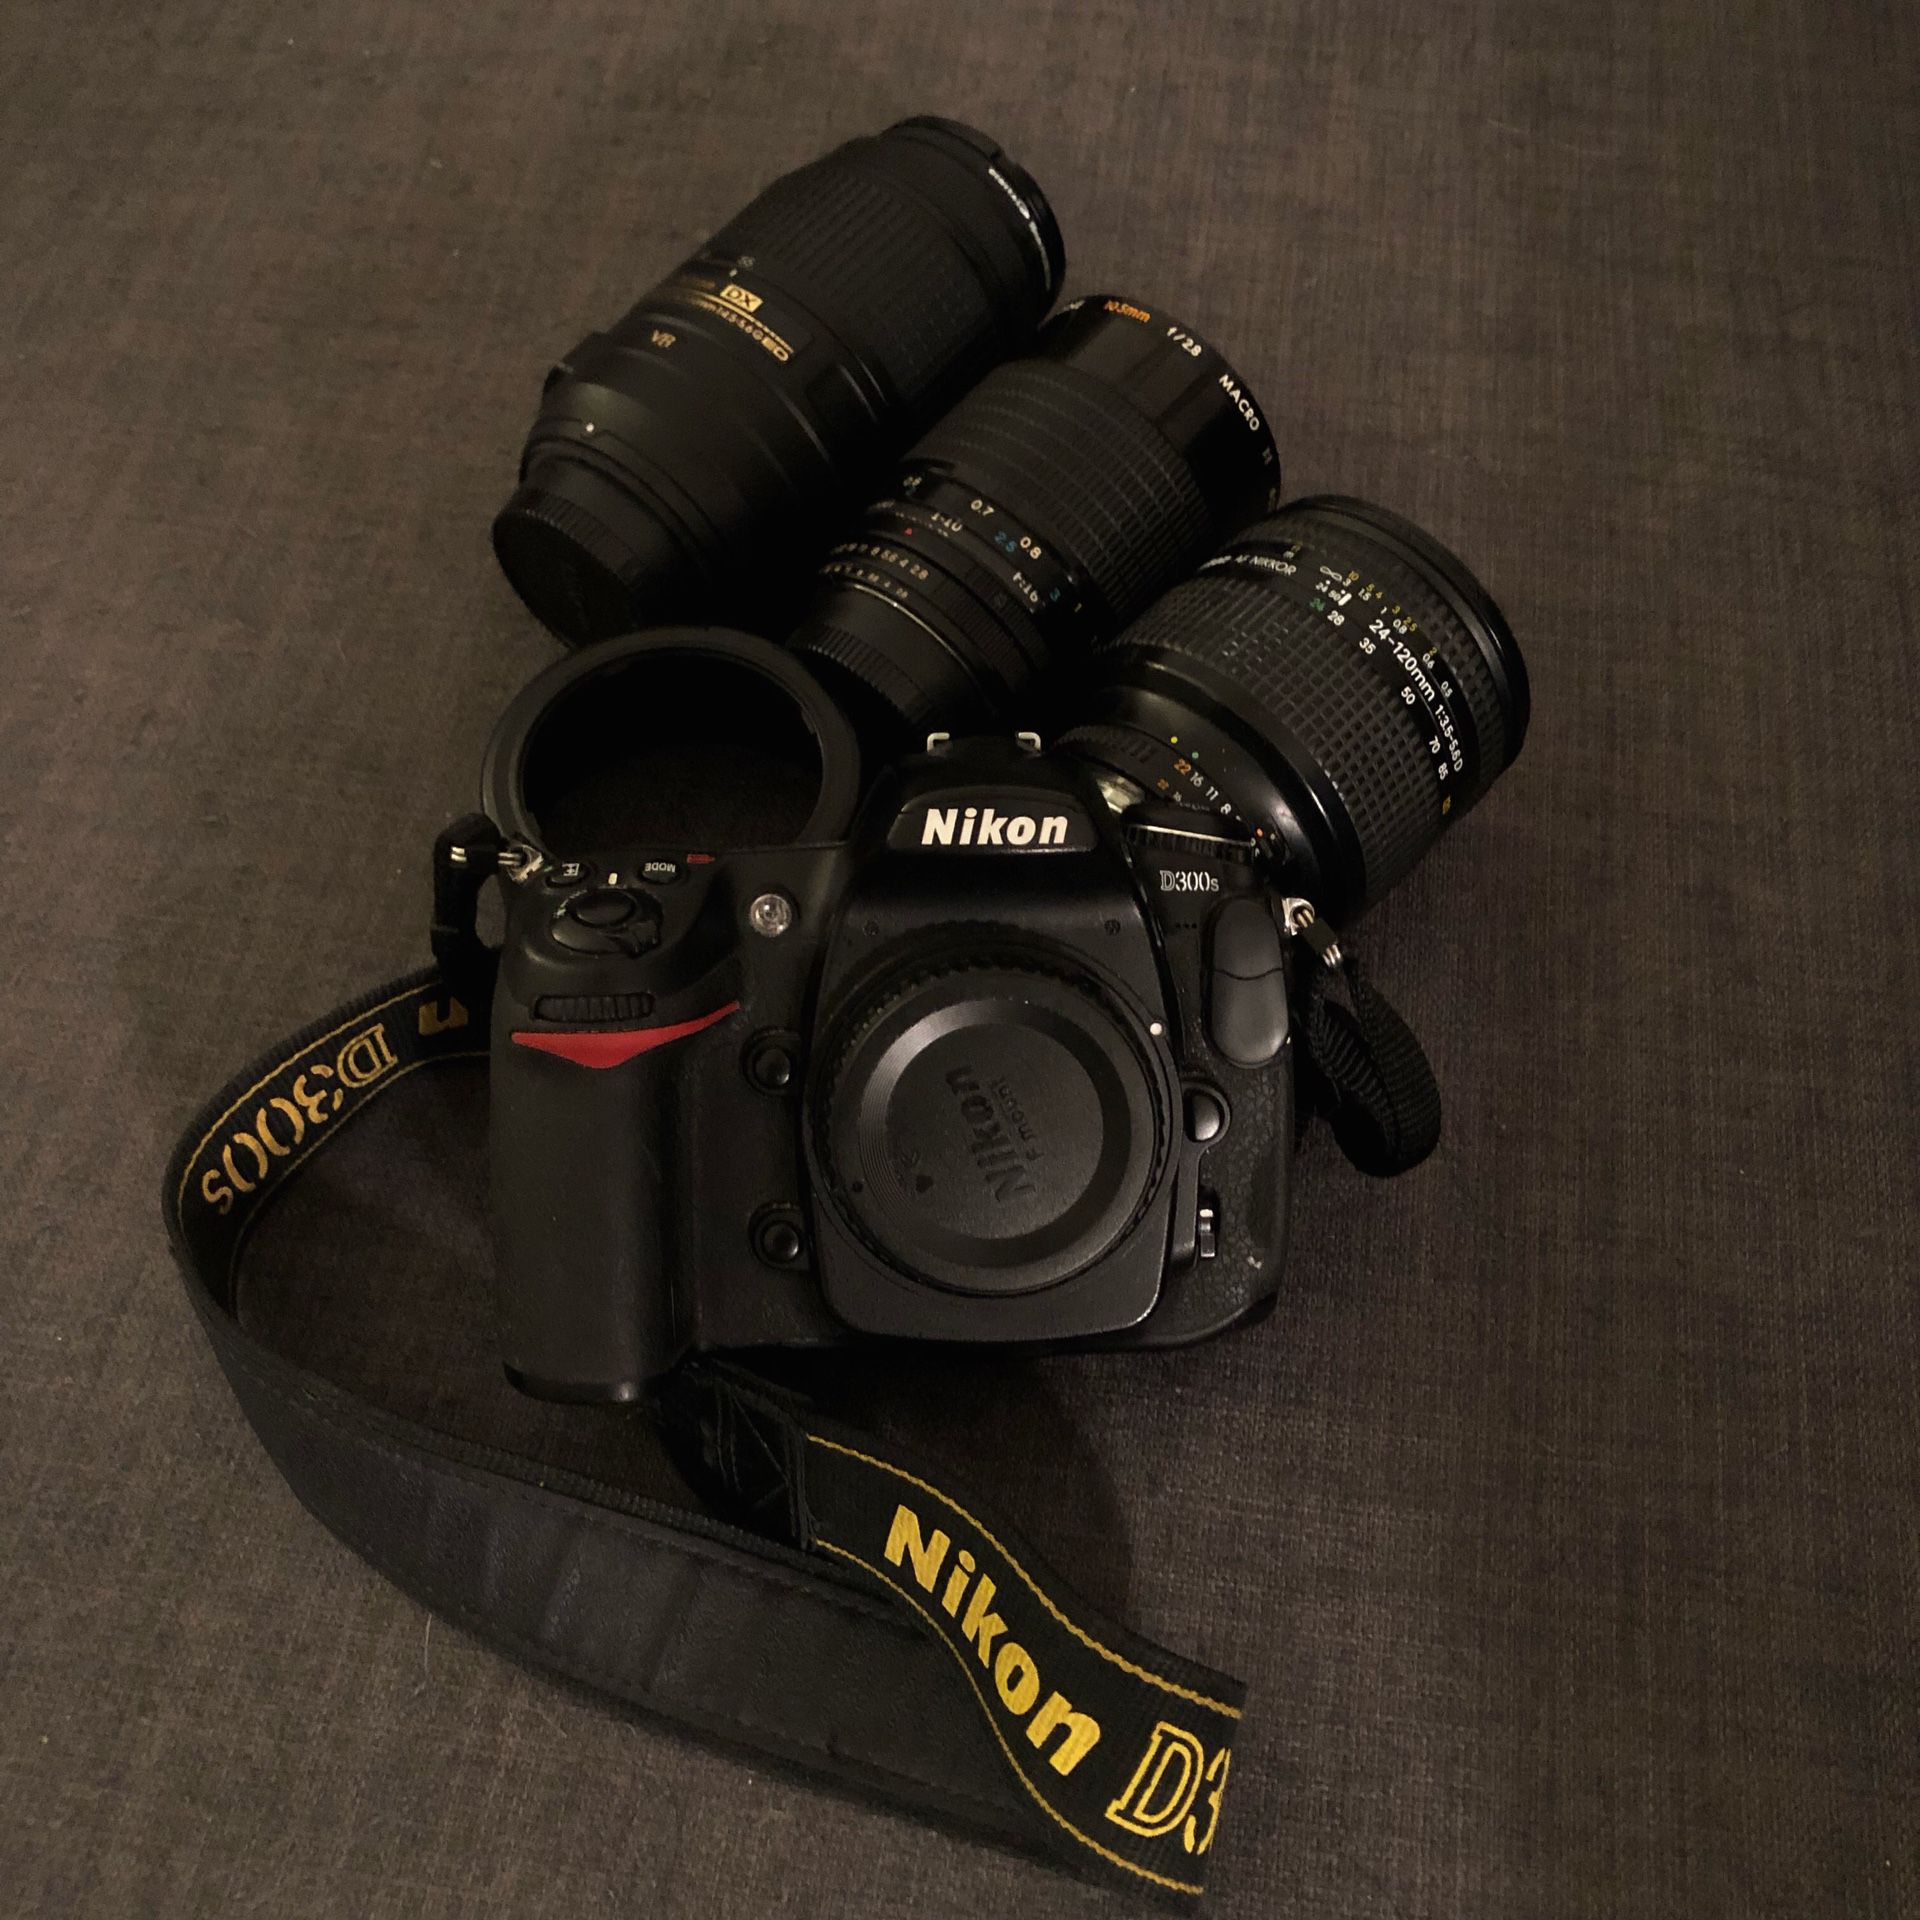 Nikon D300s, 3 Lenses, and Accessories (Ready-to-Shoot!)